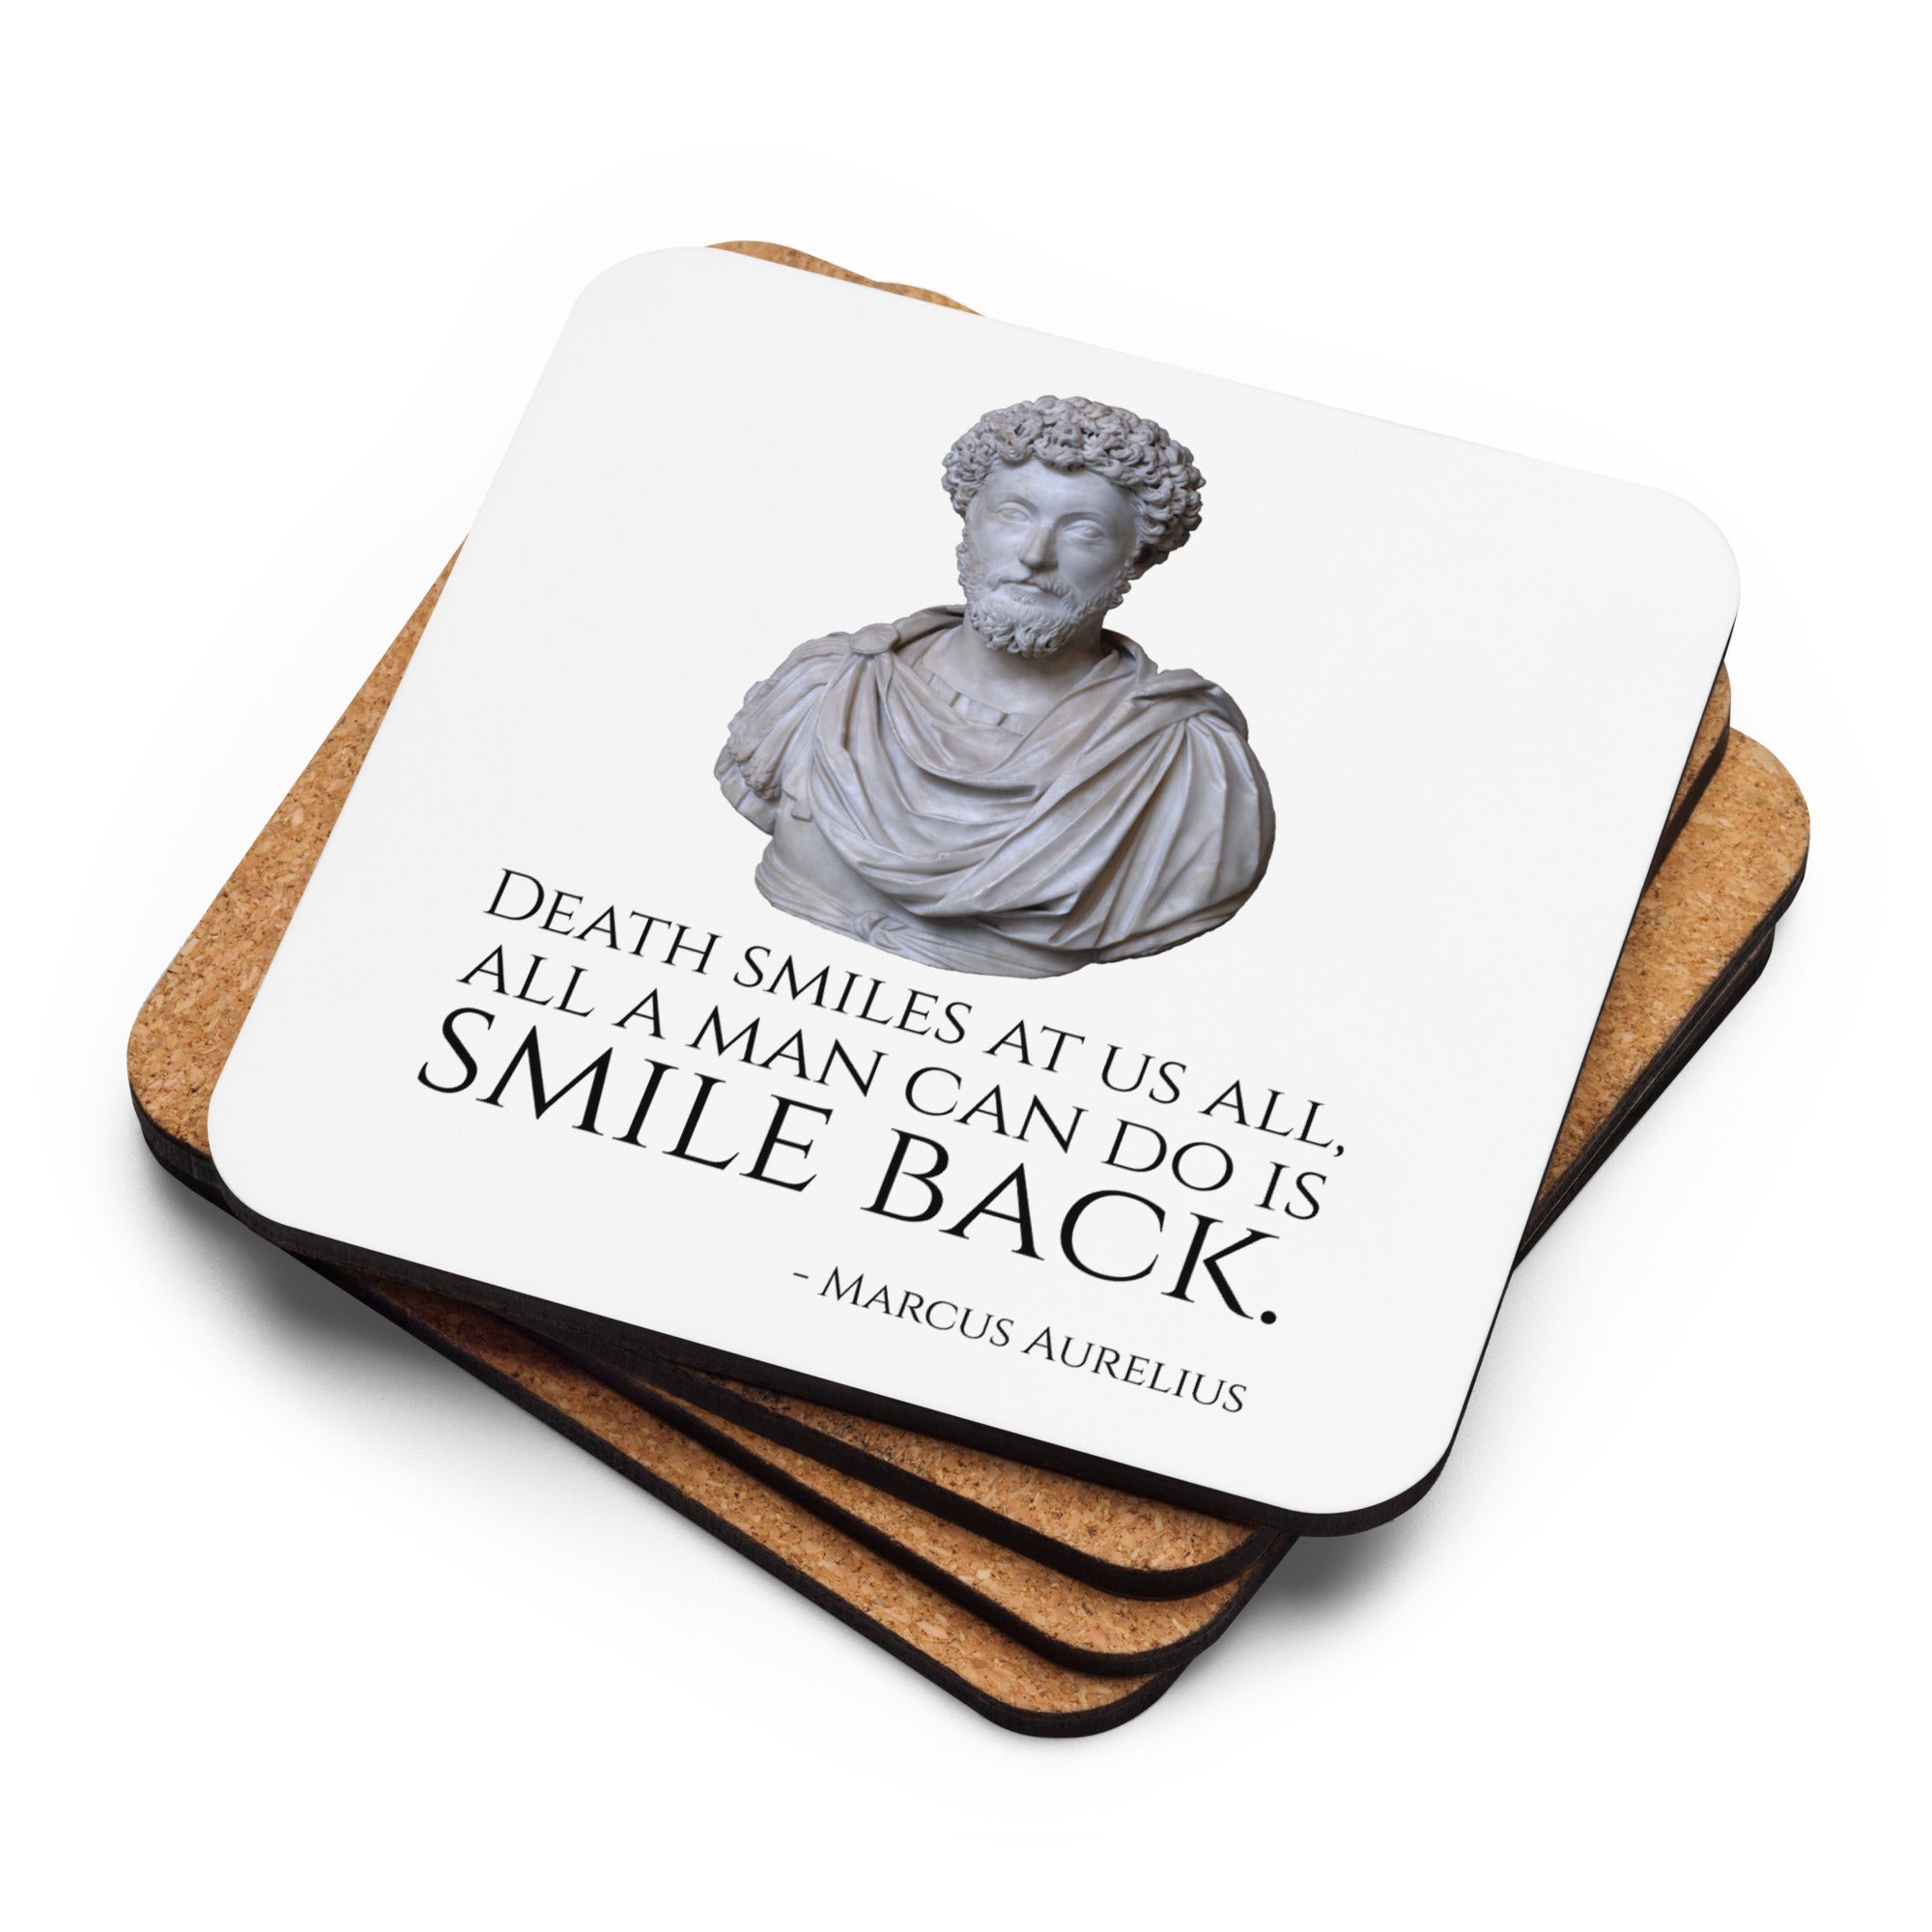 Death Smiles At Us All, All A Man Can Do Is Smile Back. - Marcus Aurelius - Stoic Philosophy Cork-Back Coaster